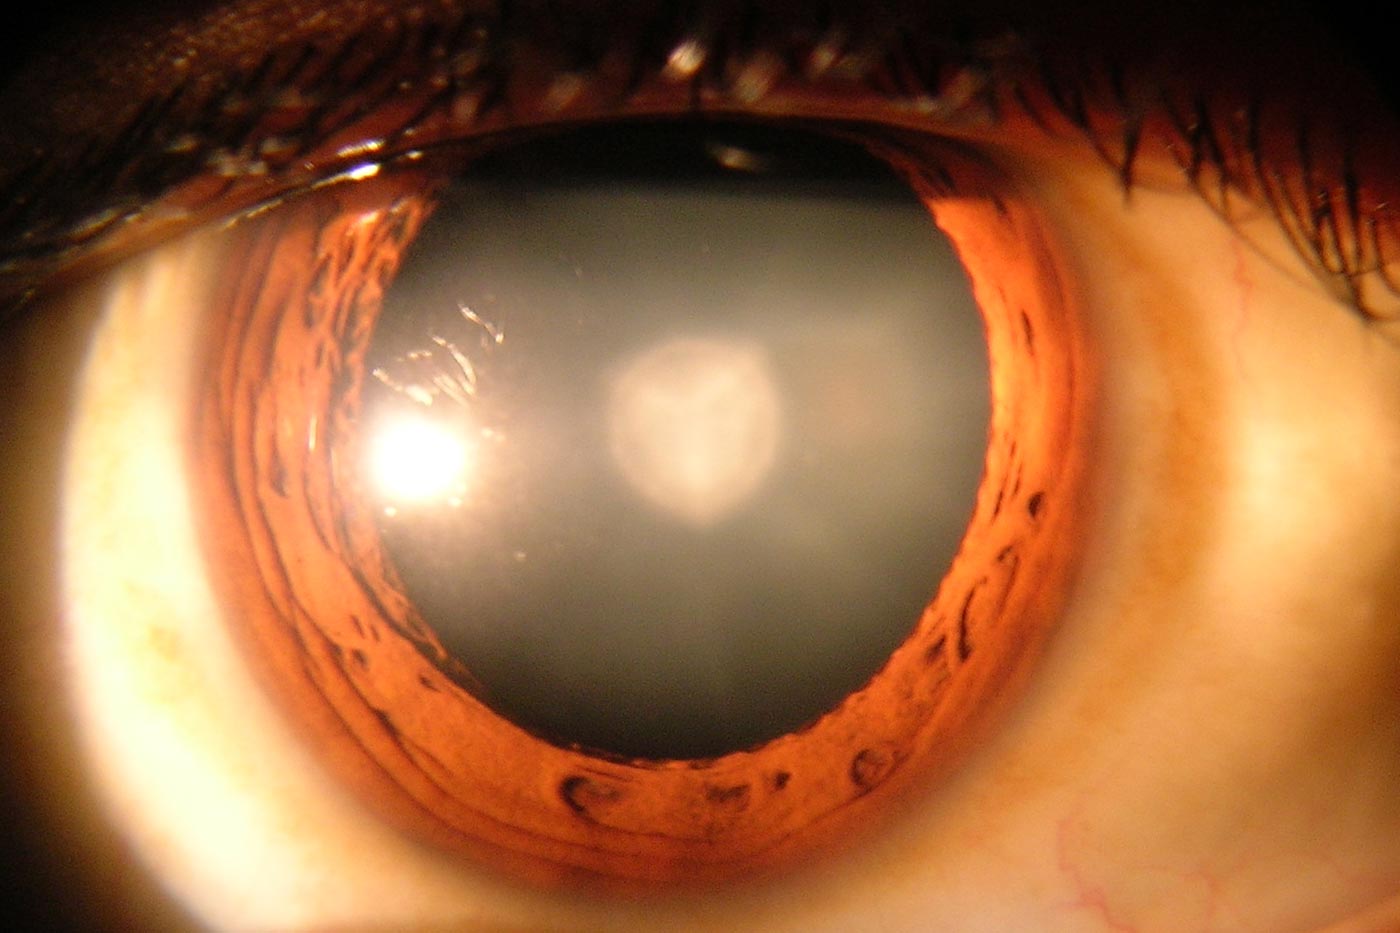 Cataracts. Image: Rakesh Ahuja, MD. Llicensed under the Creative Commons Attribution-Share Alike 3.0 Unported license.